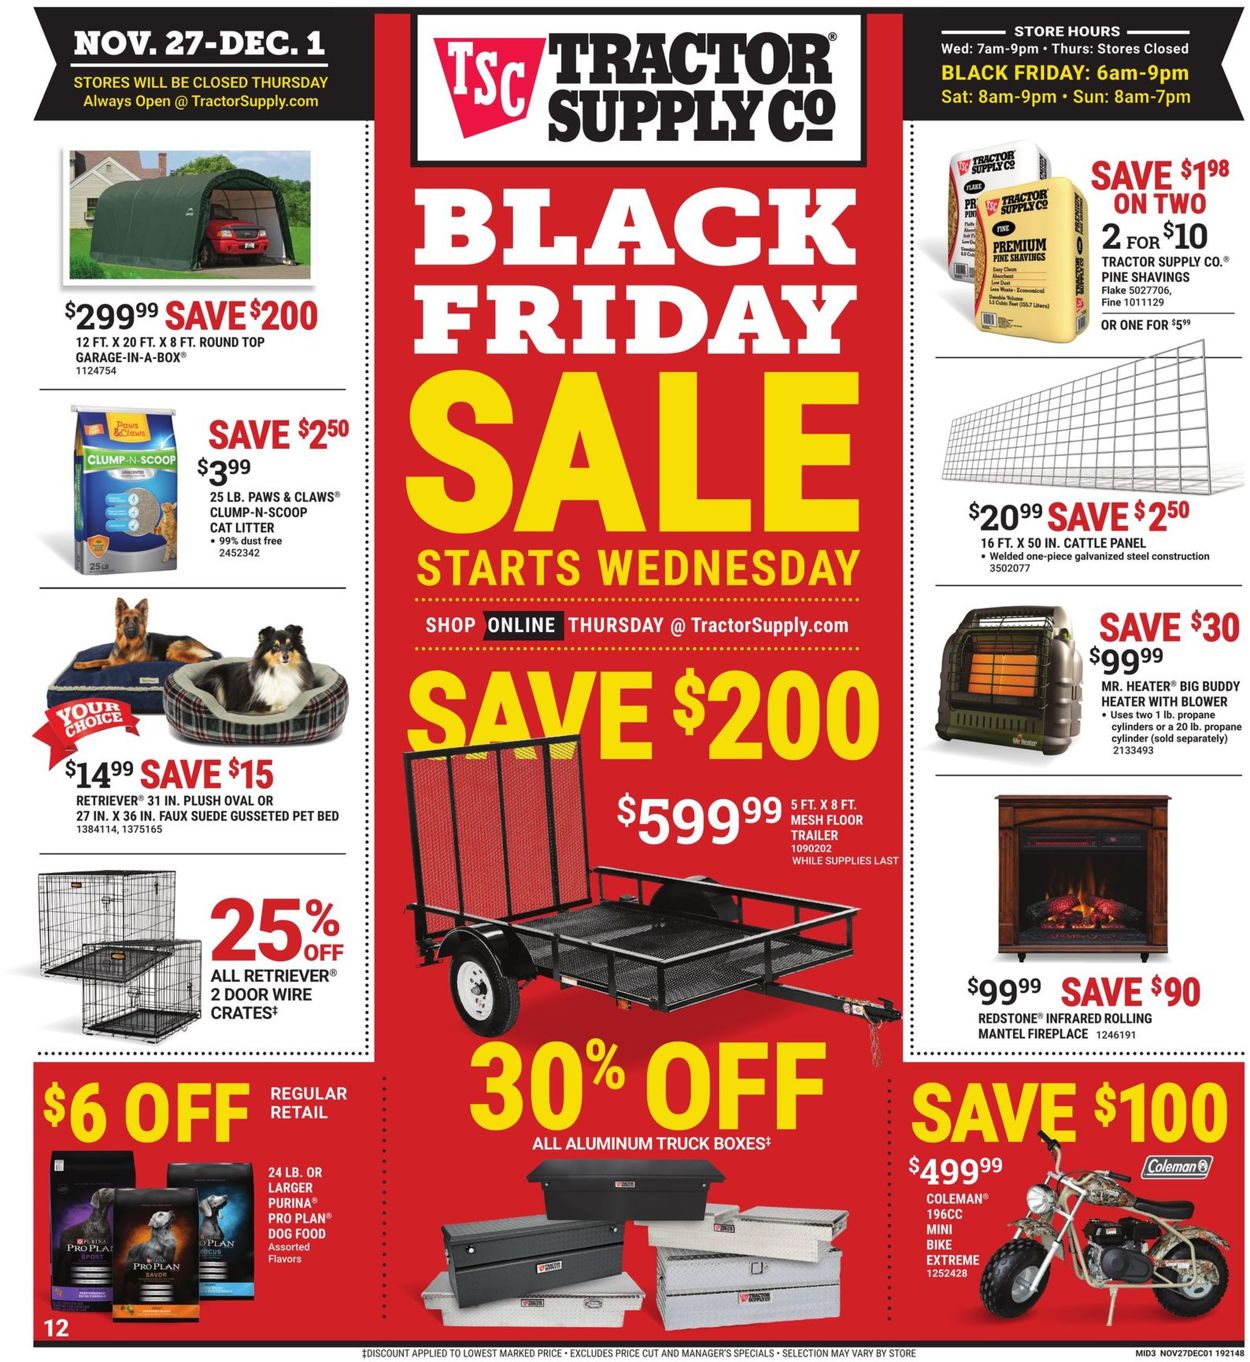 Tractor Supply - Black Friday Ad 2019. 